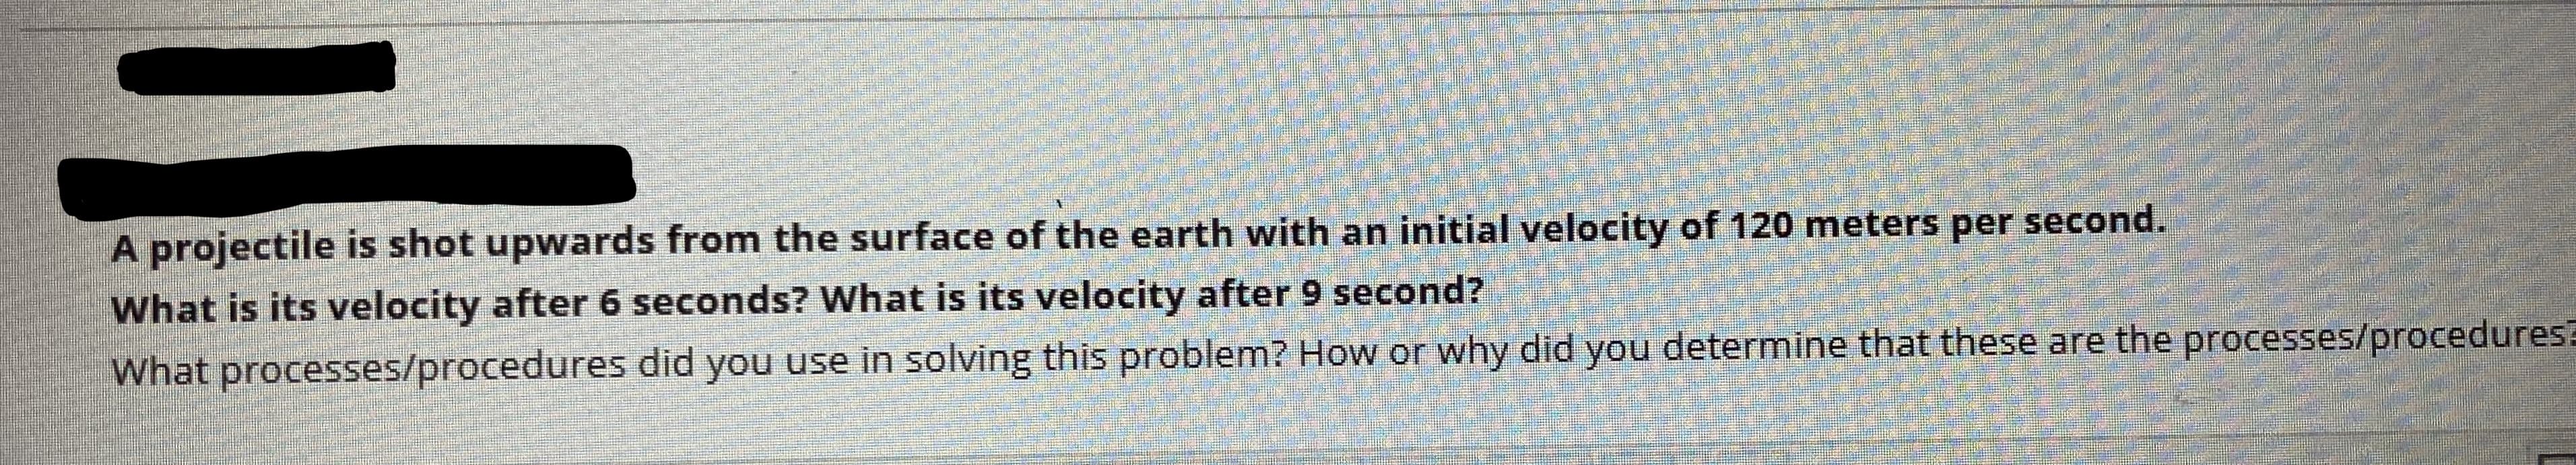 A projectile is shot upwards from the surface of the earth with an initial velocity of 120 meters per second.
What is its velocity after 6 seconds? What is its velocity after 9 second?
+hat thoco are the prd
